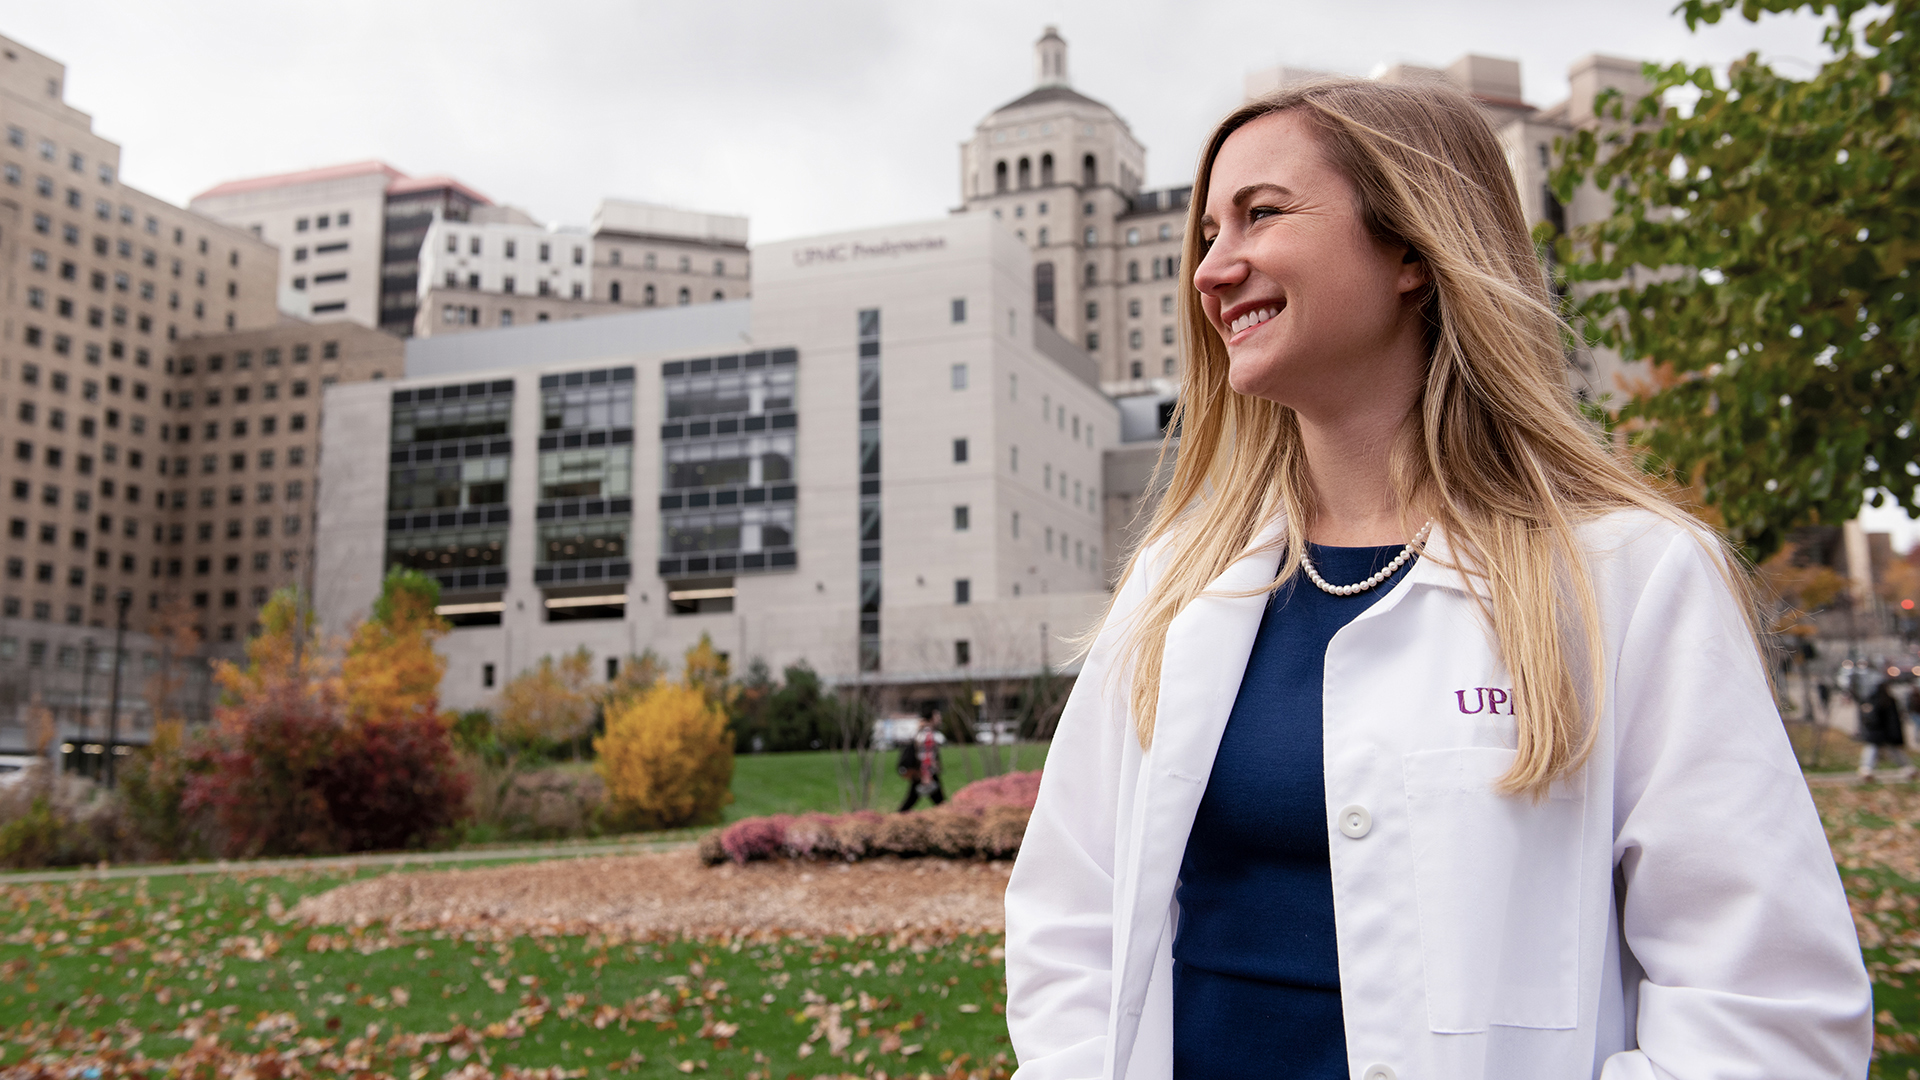 Dr. Erin McCreary in front of hospital